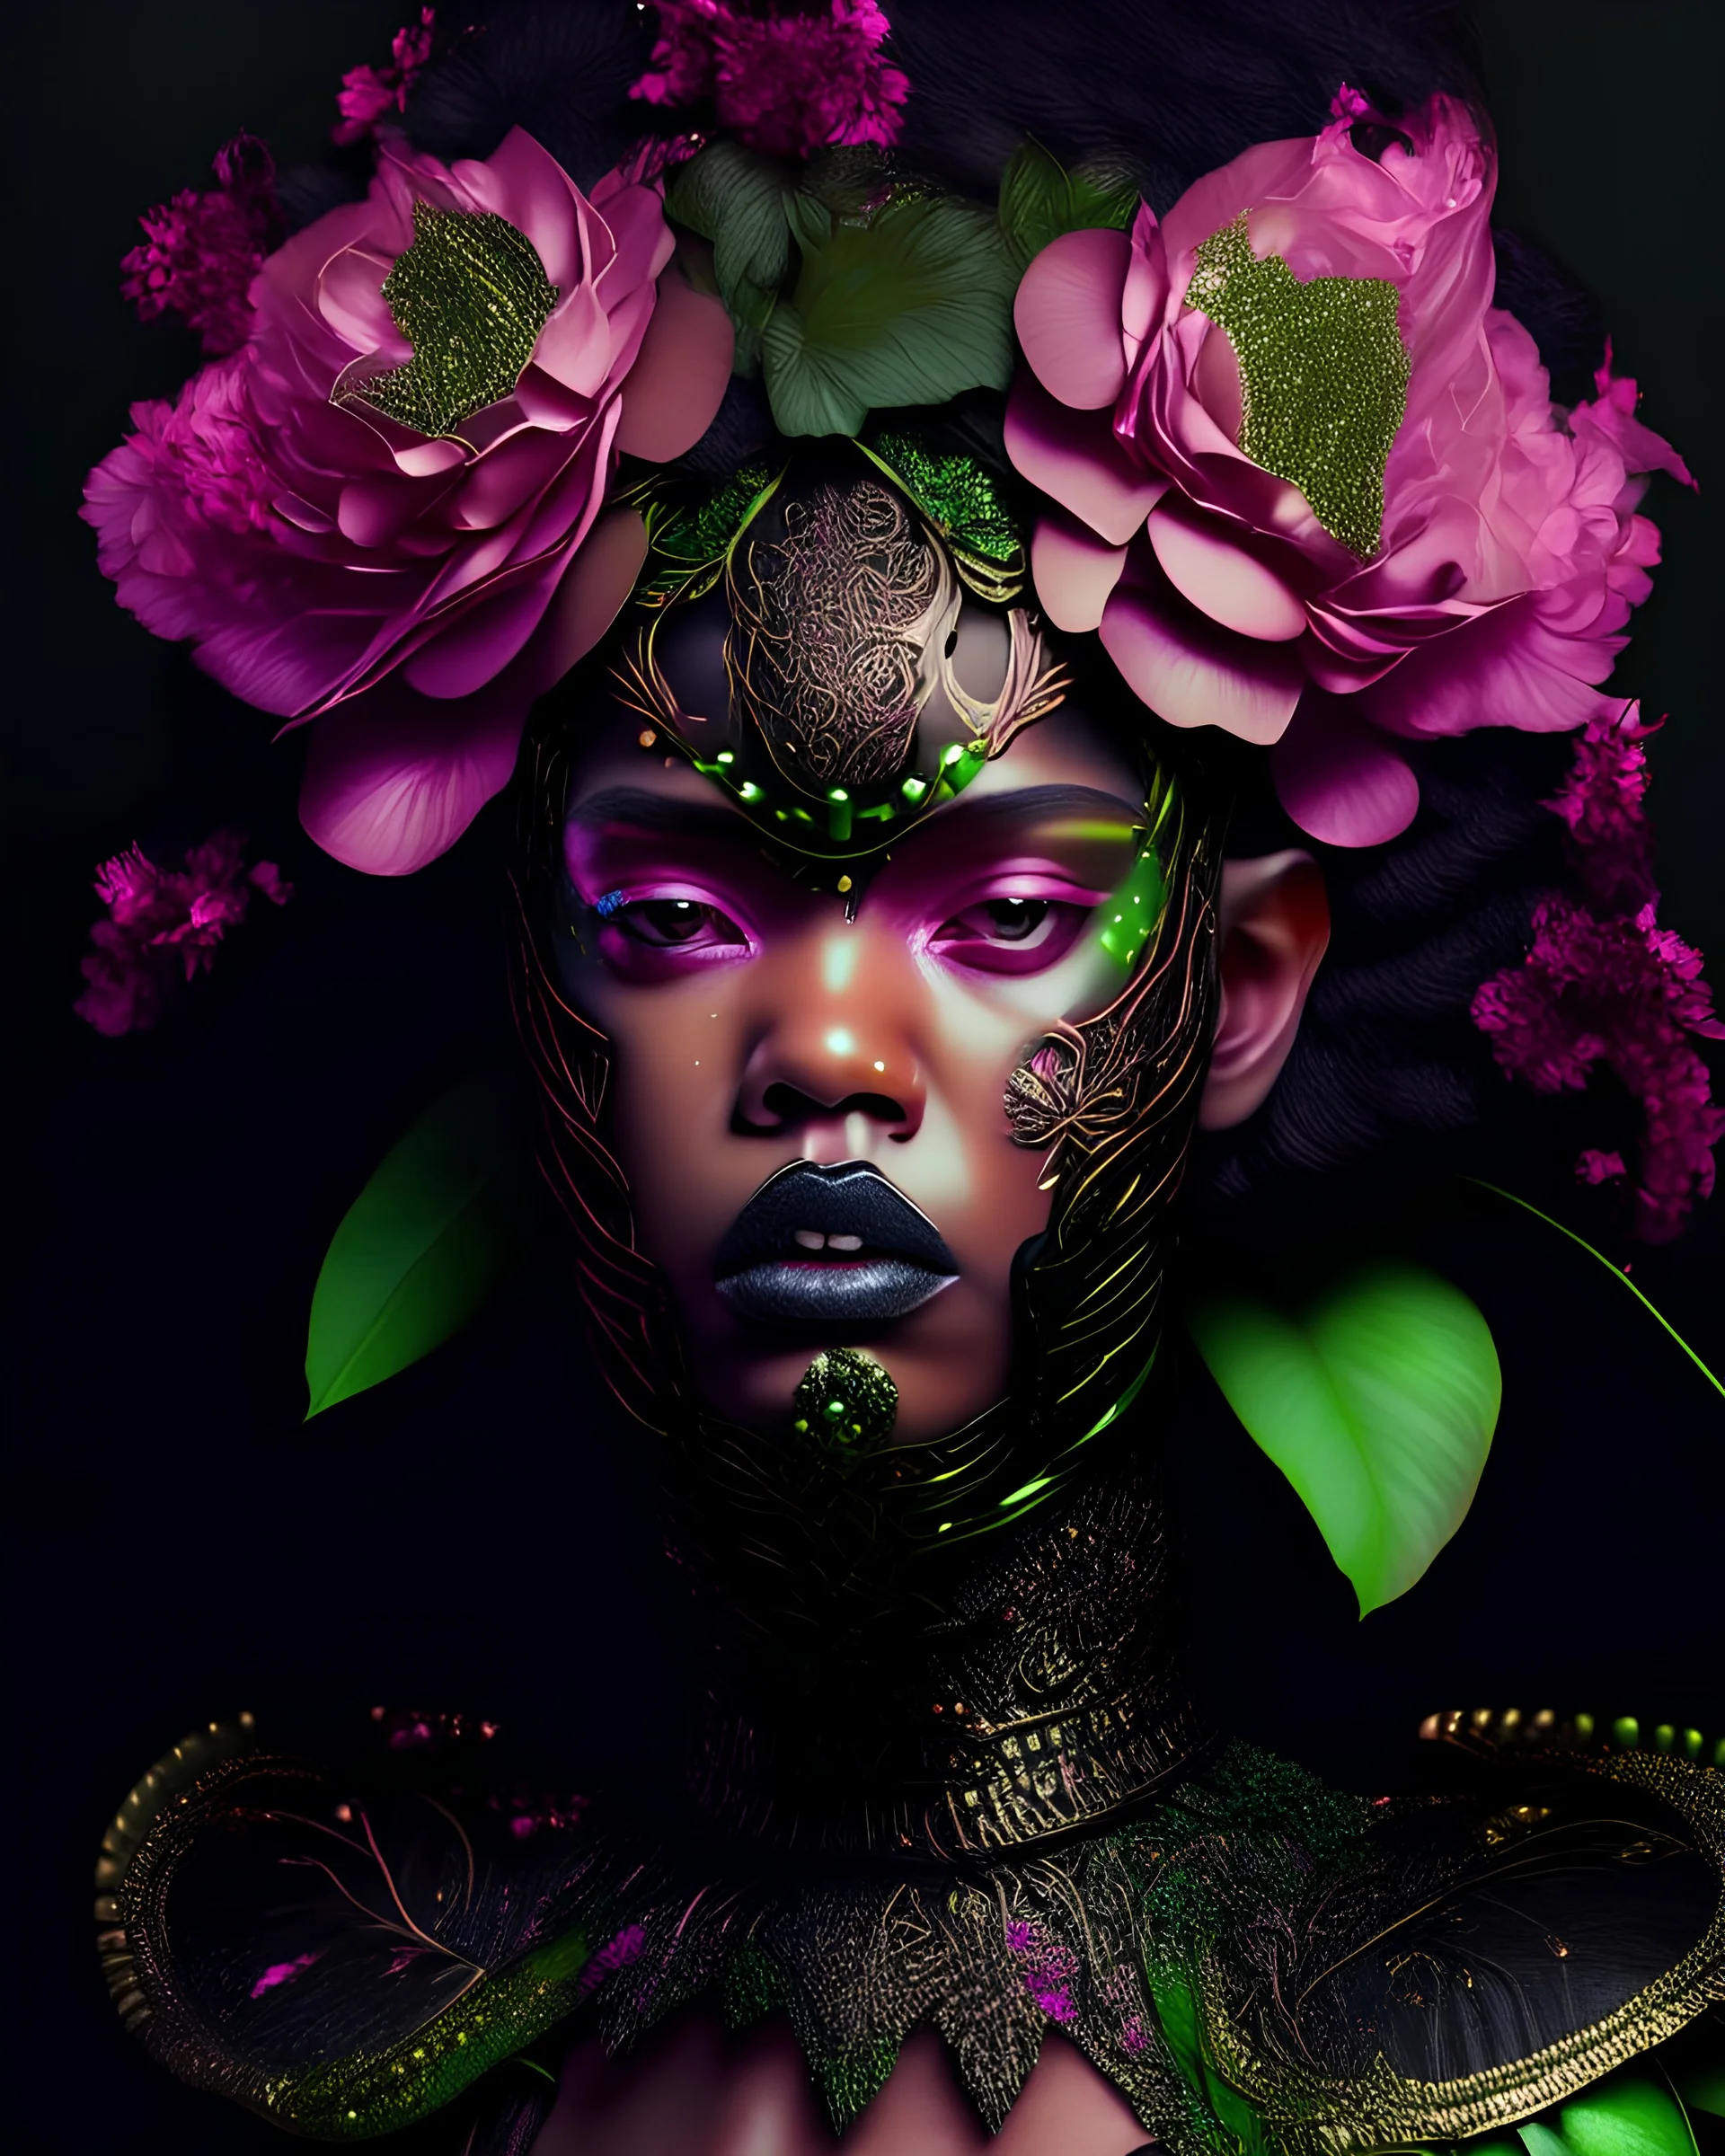 Beautiful young vantablack woman portrait adorned with begonia rex leaves botanikai headress metallic filigree masque ribbed with green ad pink quartz wearing carnival style rennasance voidcore shamanism costume armour floral embossed Golden filigree organic bio spinal ribbed detail of full floral bloomed background extremely dealed hyperrealistic maximálist concept portrait art